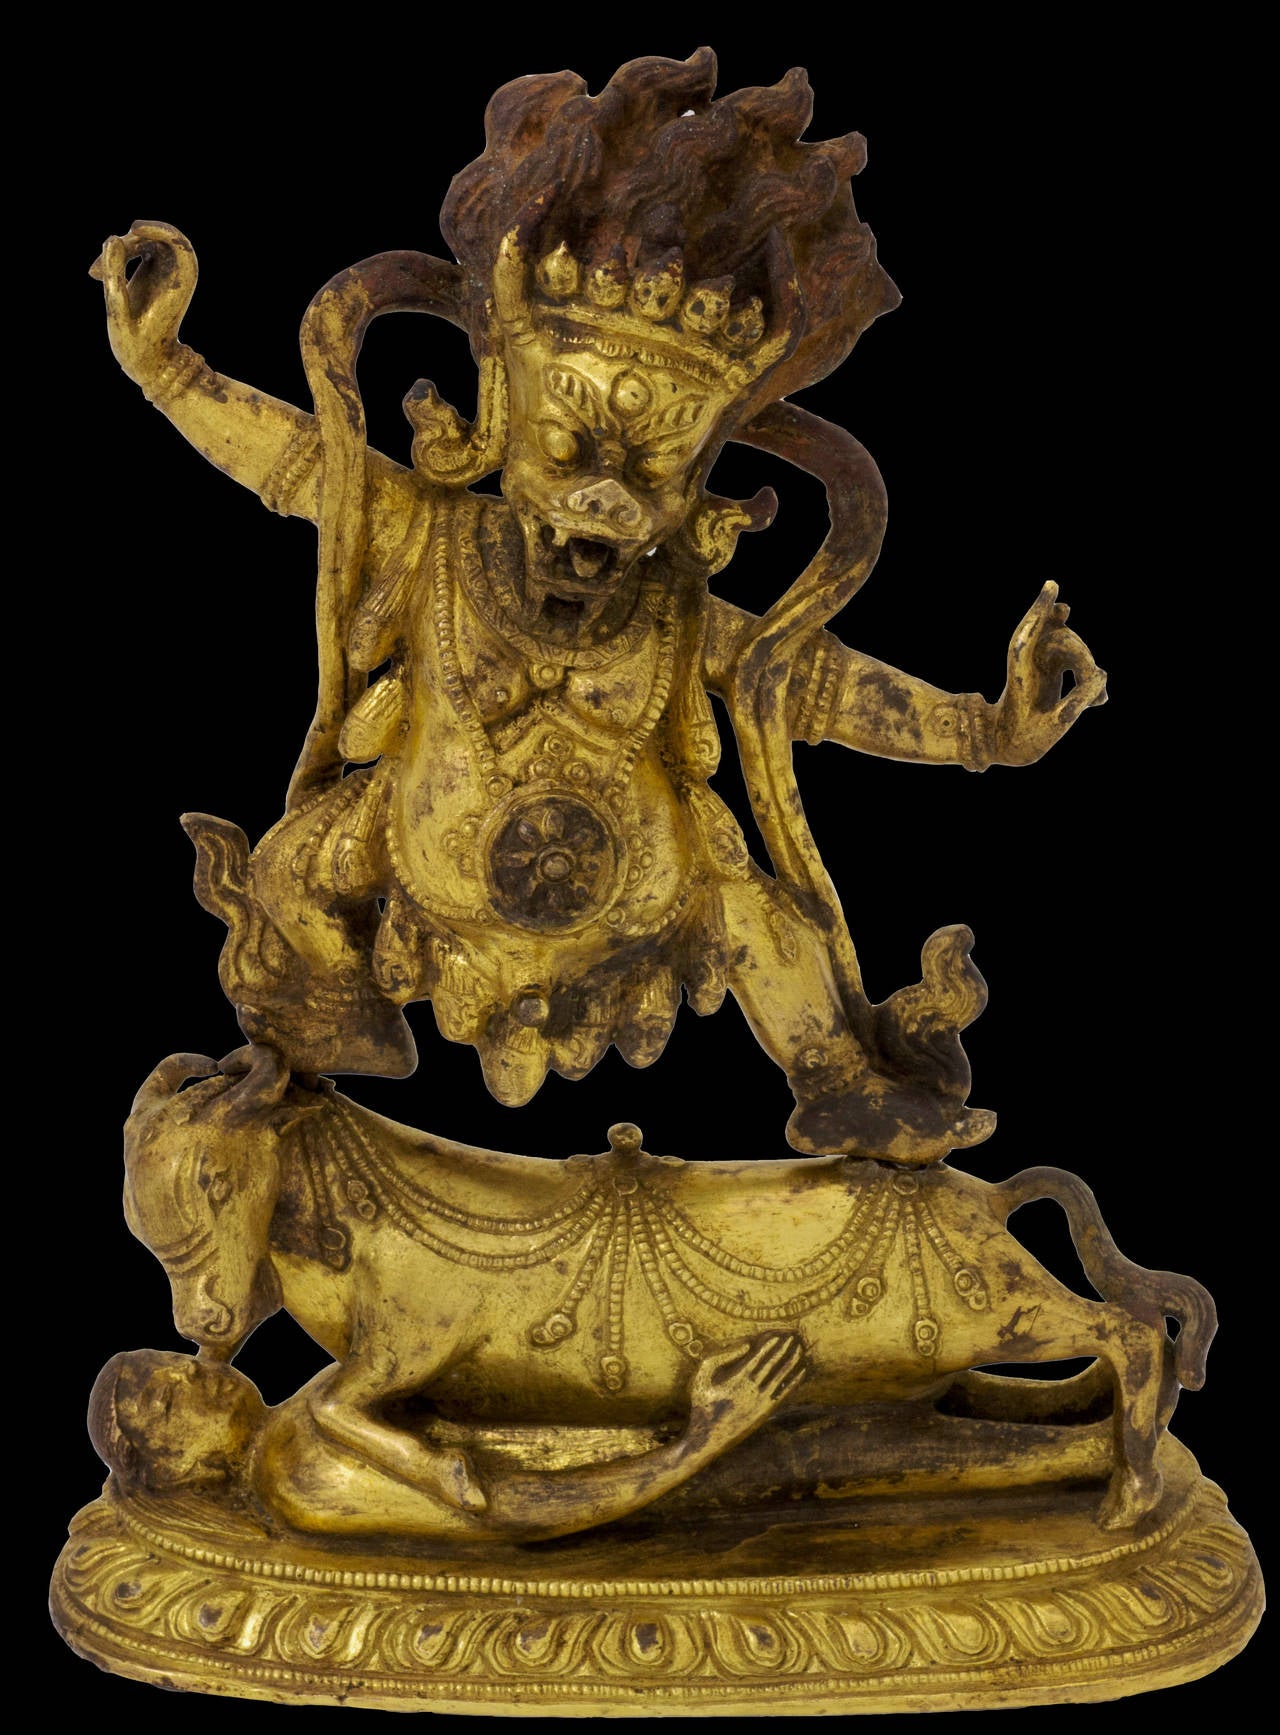 Yama Dharmaraja (lit. Lord of Death, King of the Law), the pot bellied, buffalo headed deity, is depicted in a powerful stance atop his vehicle, the buffalo, who rests on a prostrate human figure, representing perseverance over ignorance and worldly